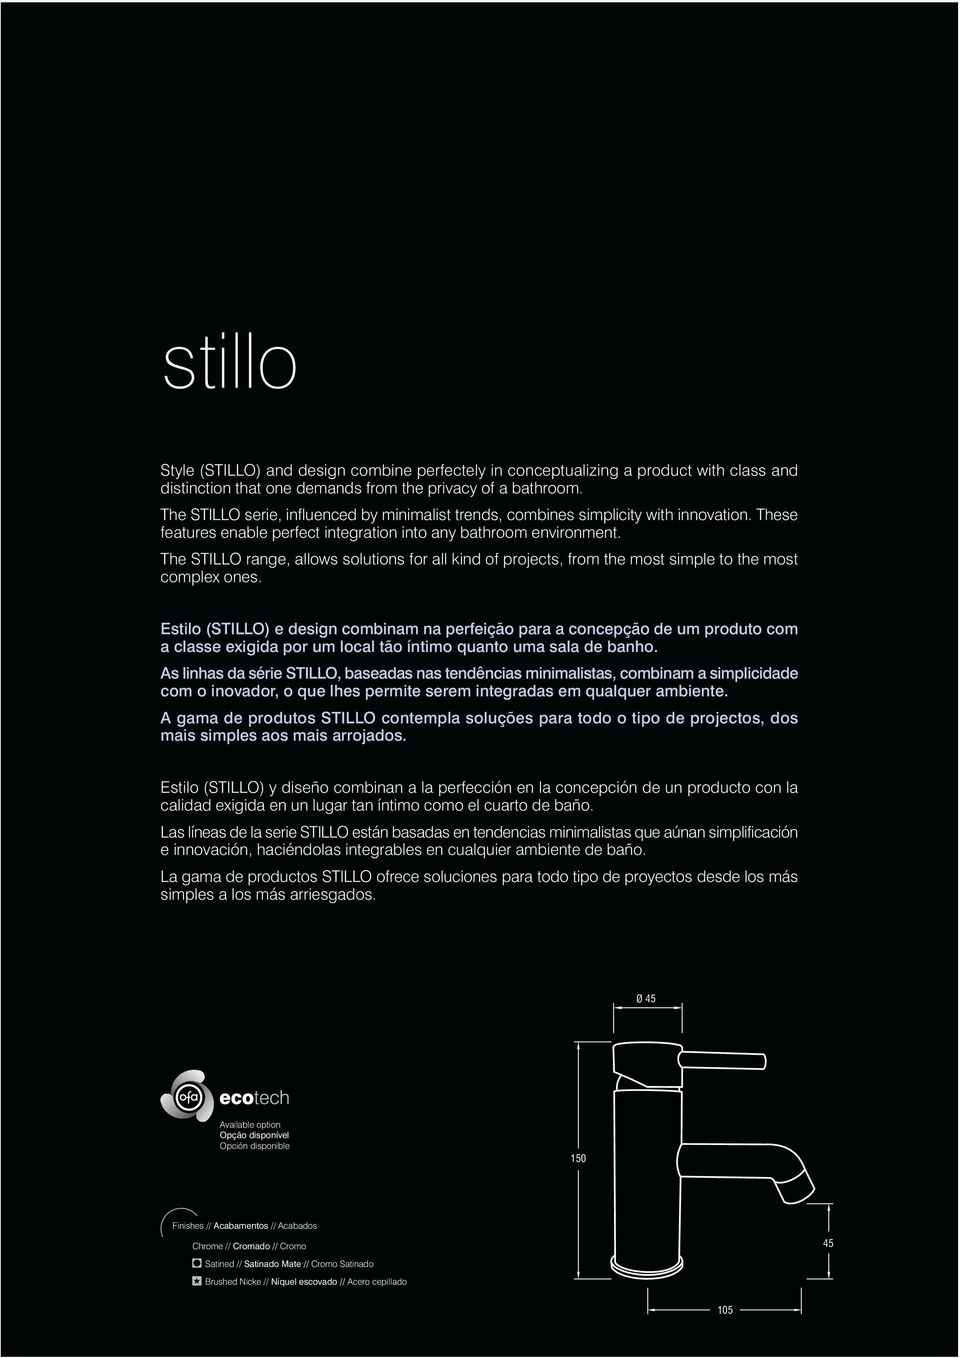 The STILLO range, allows solutions for all kind of projects, from the most simple to the most complex ones.